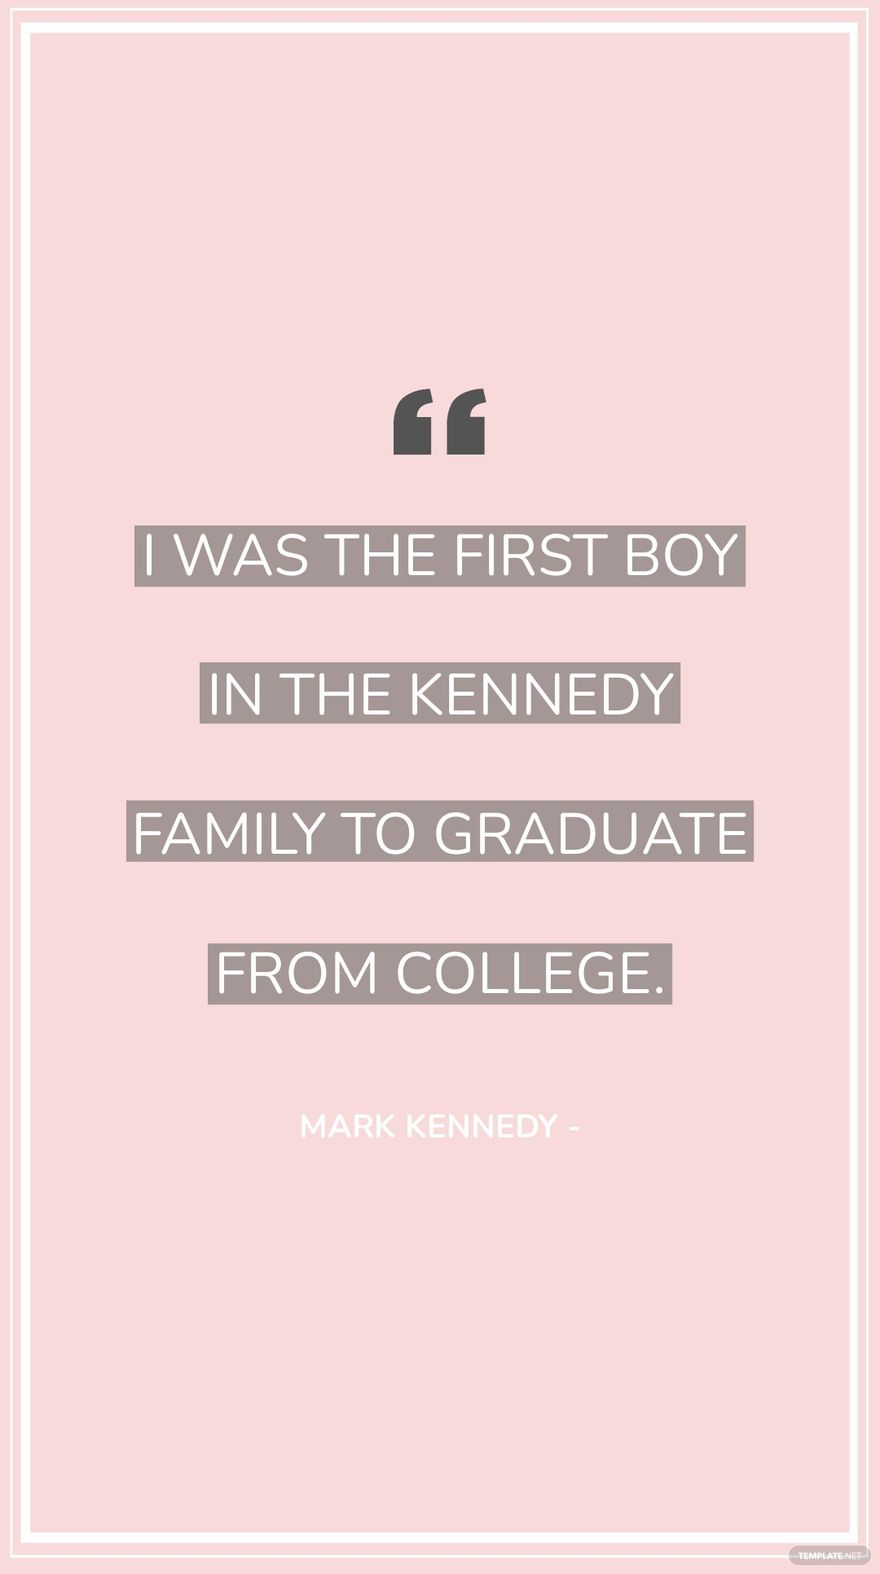 Free Mark Kennedy - I was the first boy in the Kennedy family to graduate from college. in JPG